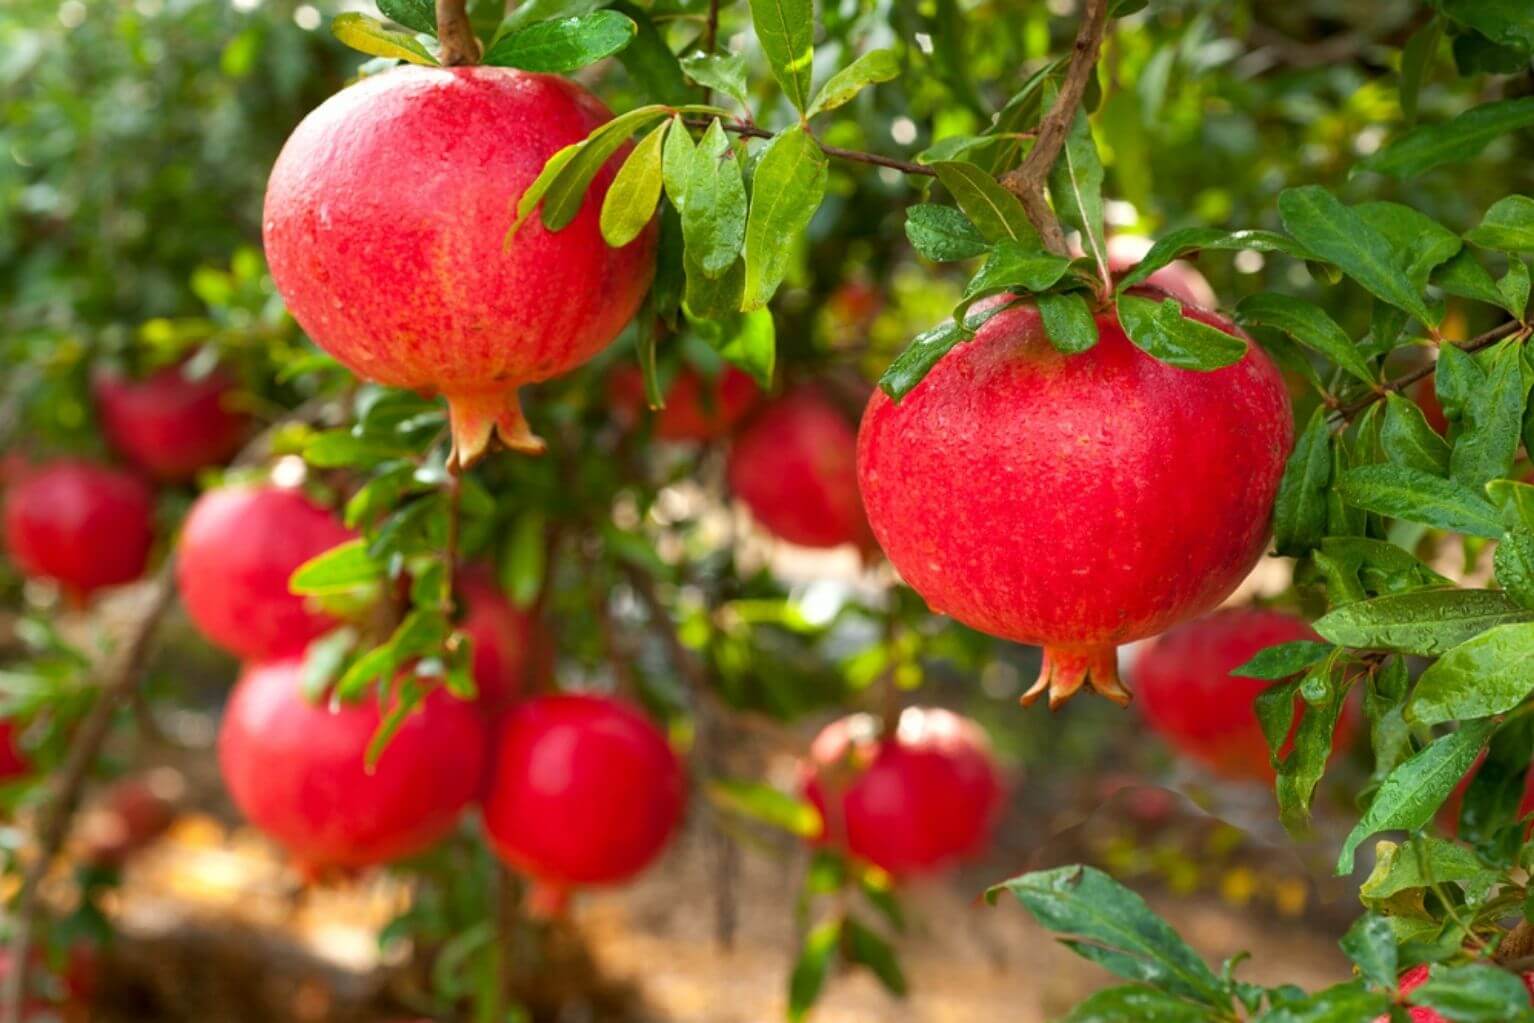 A pomegranate tree with two ripe red pomegranates hanging off the branches.